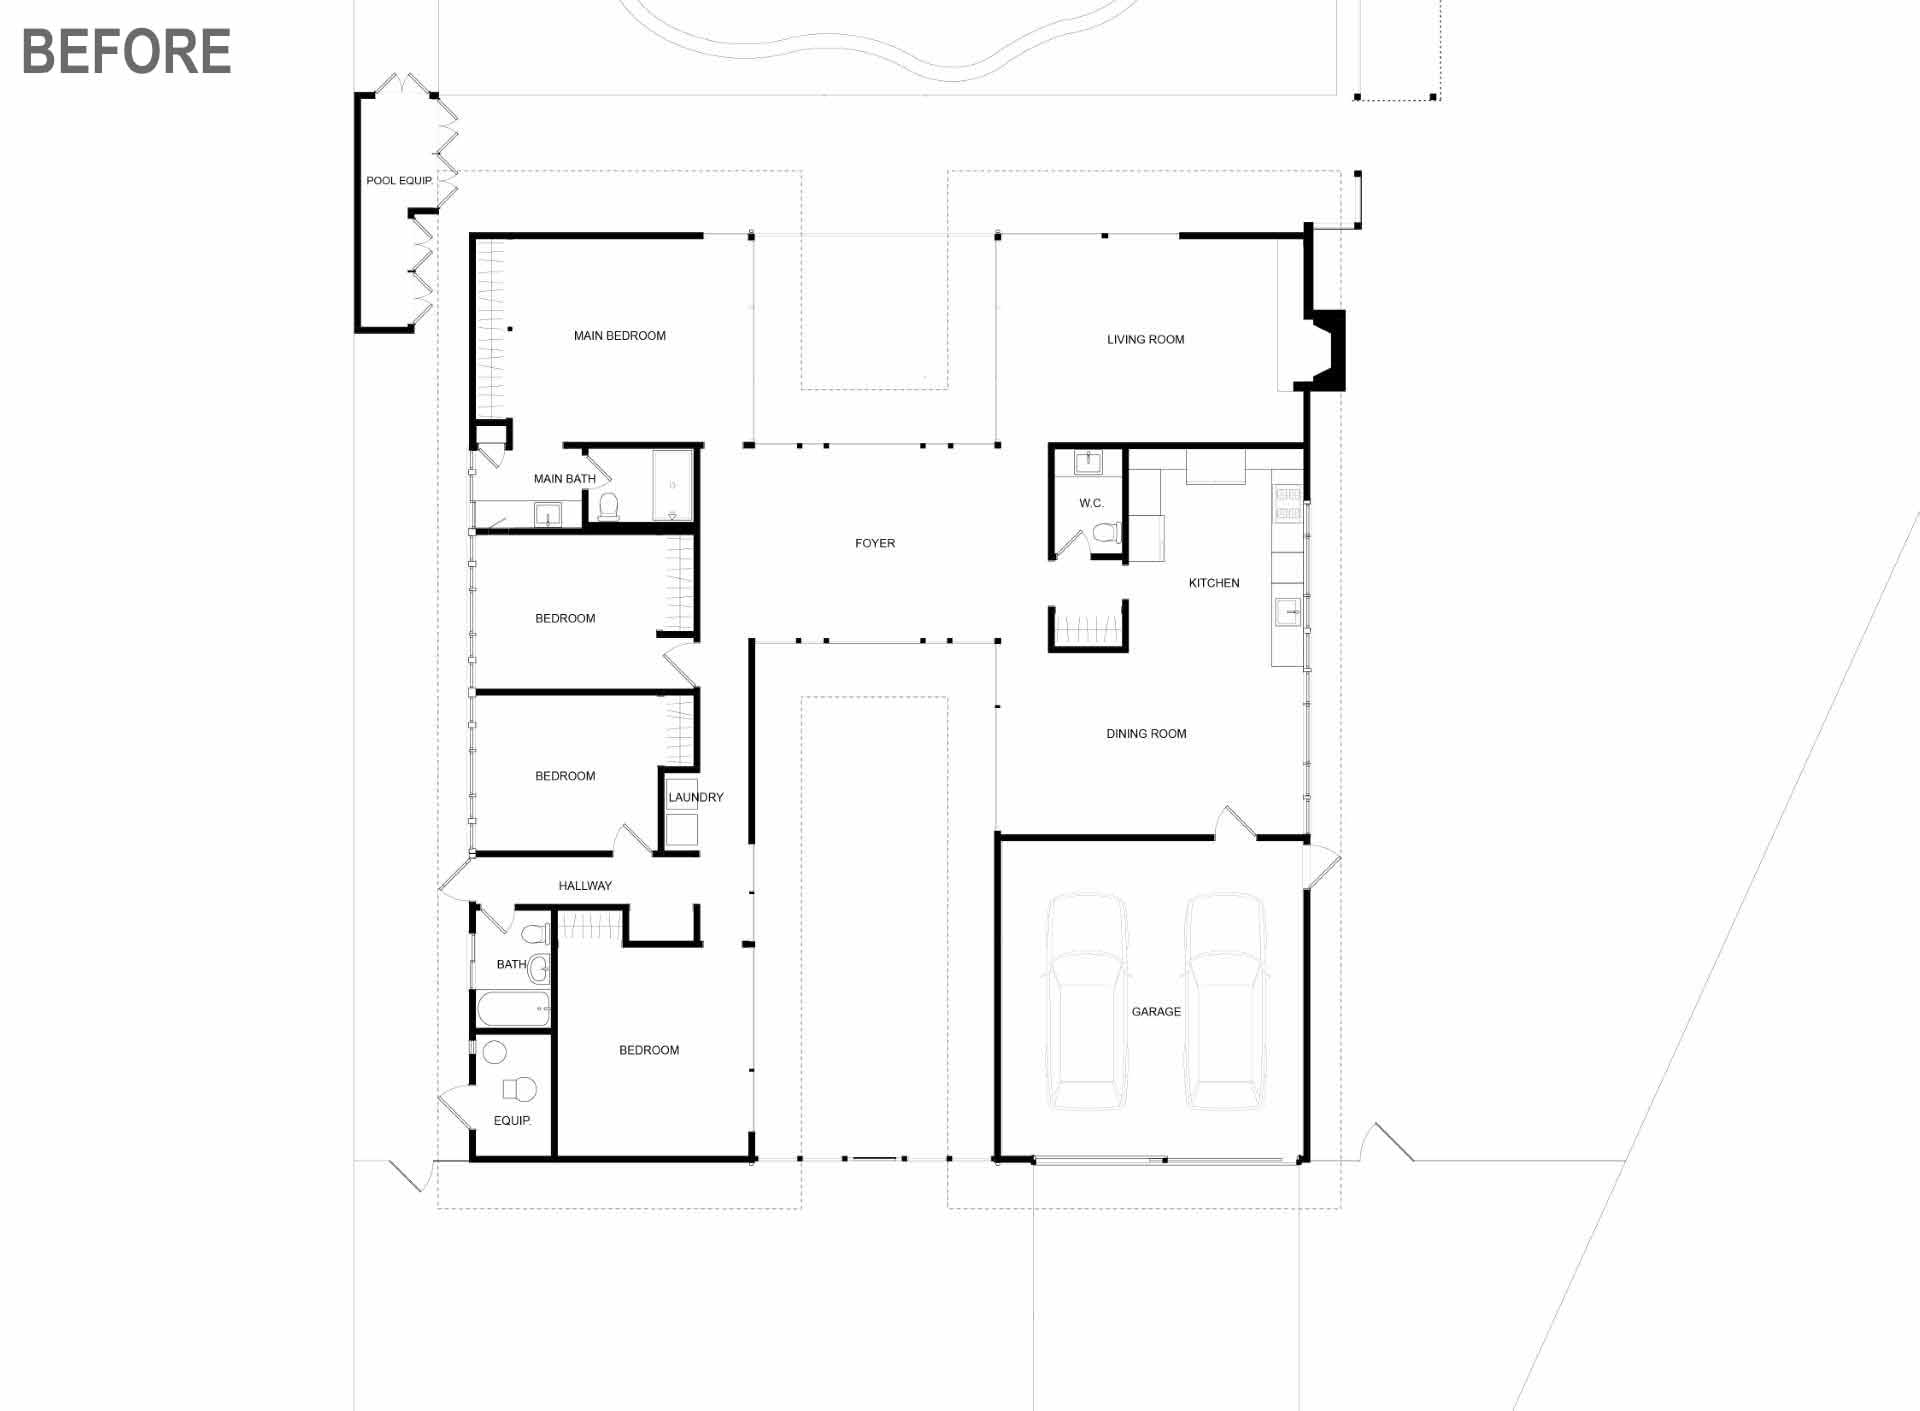 The 'before' floor plan of a remodeled Eichler home.